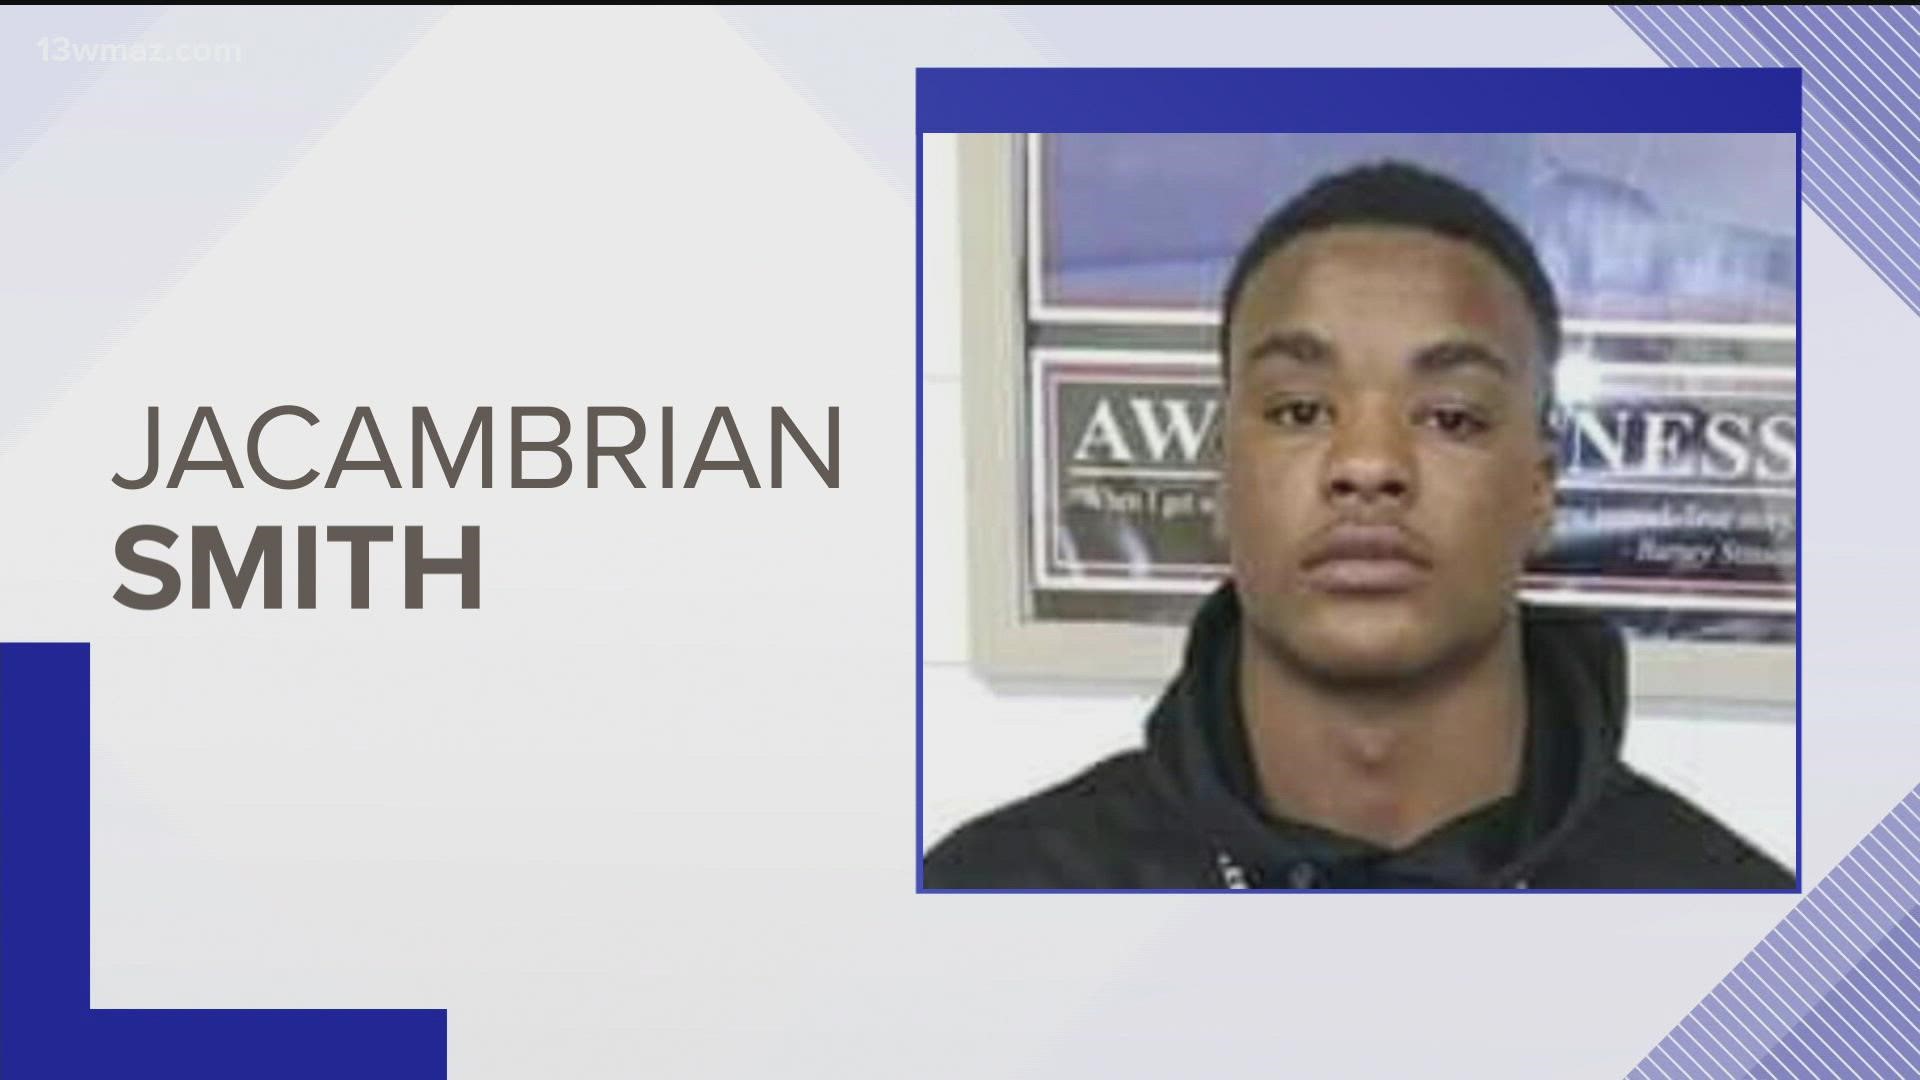 Police have arrested a teen in the shooting and are looking for the other suspect, 18-year-old Jacambrian Marquie Smith.